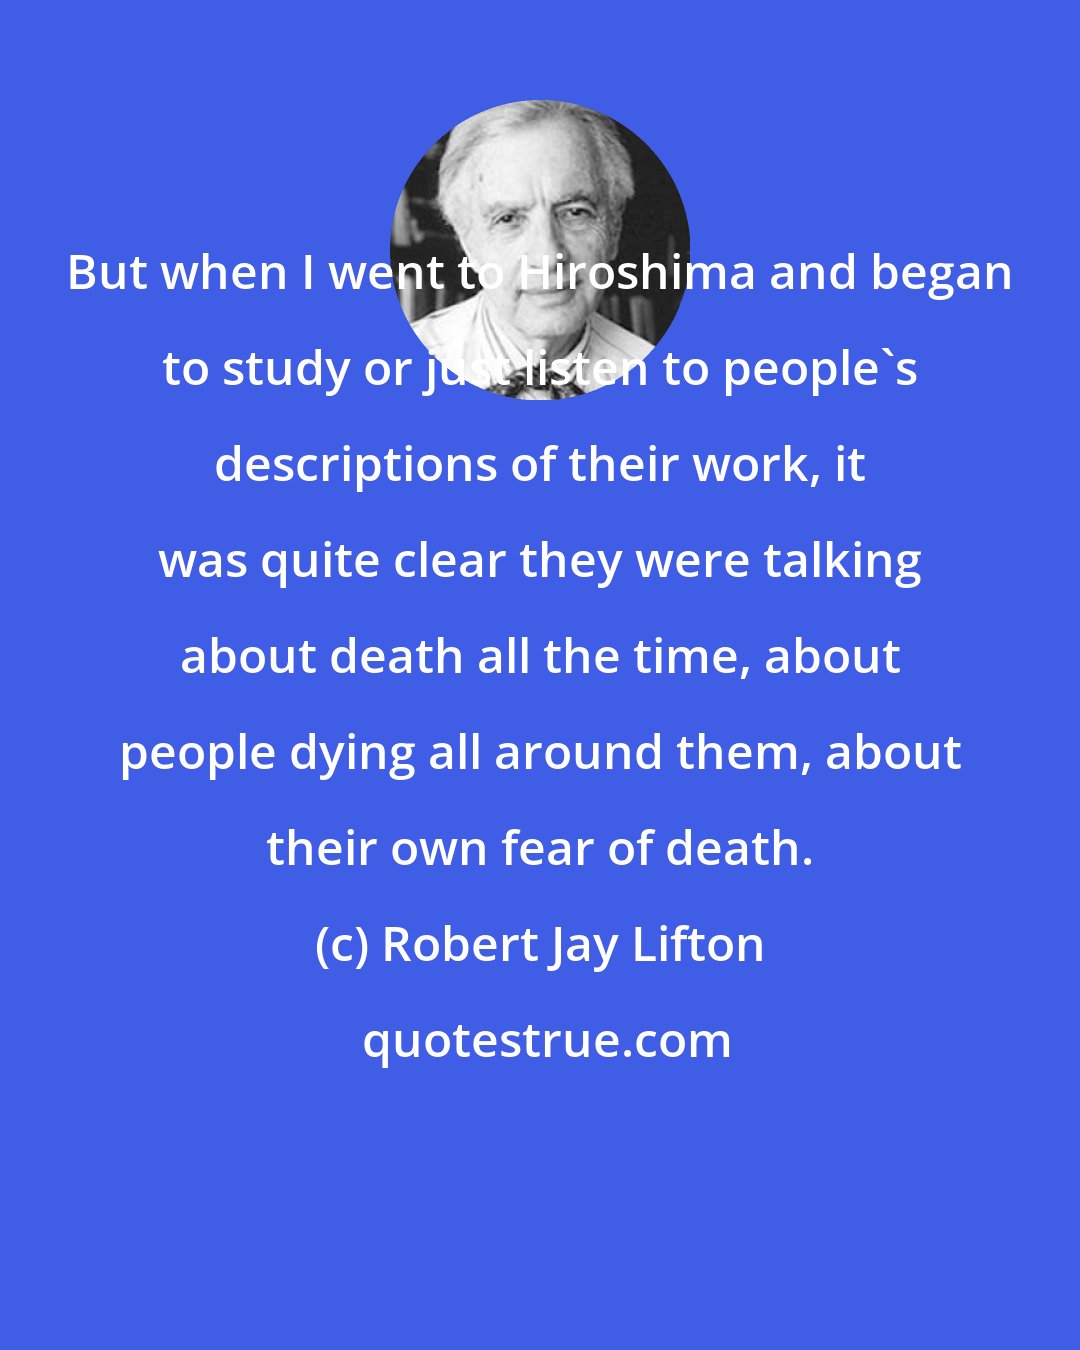 Robert Jay Lifton: But when I went to Hiroshima and began to study or just listen to people's descriptions of their work, it was quite clear they were talking about death all the time, about people dying all around them, about their own fear of death.